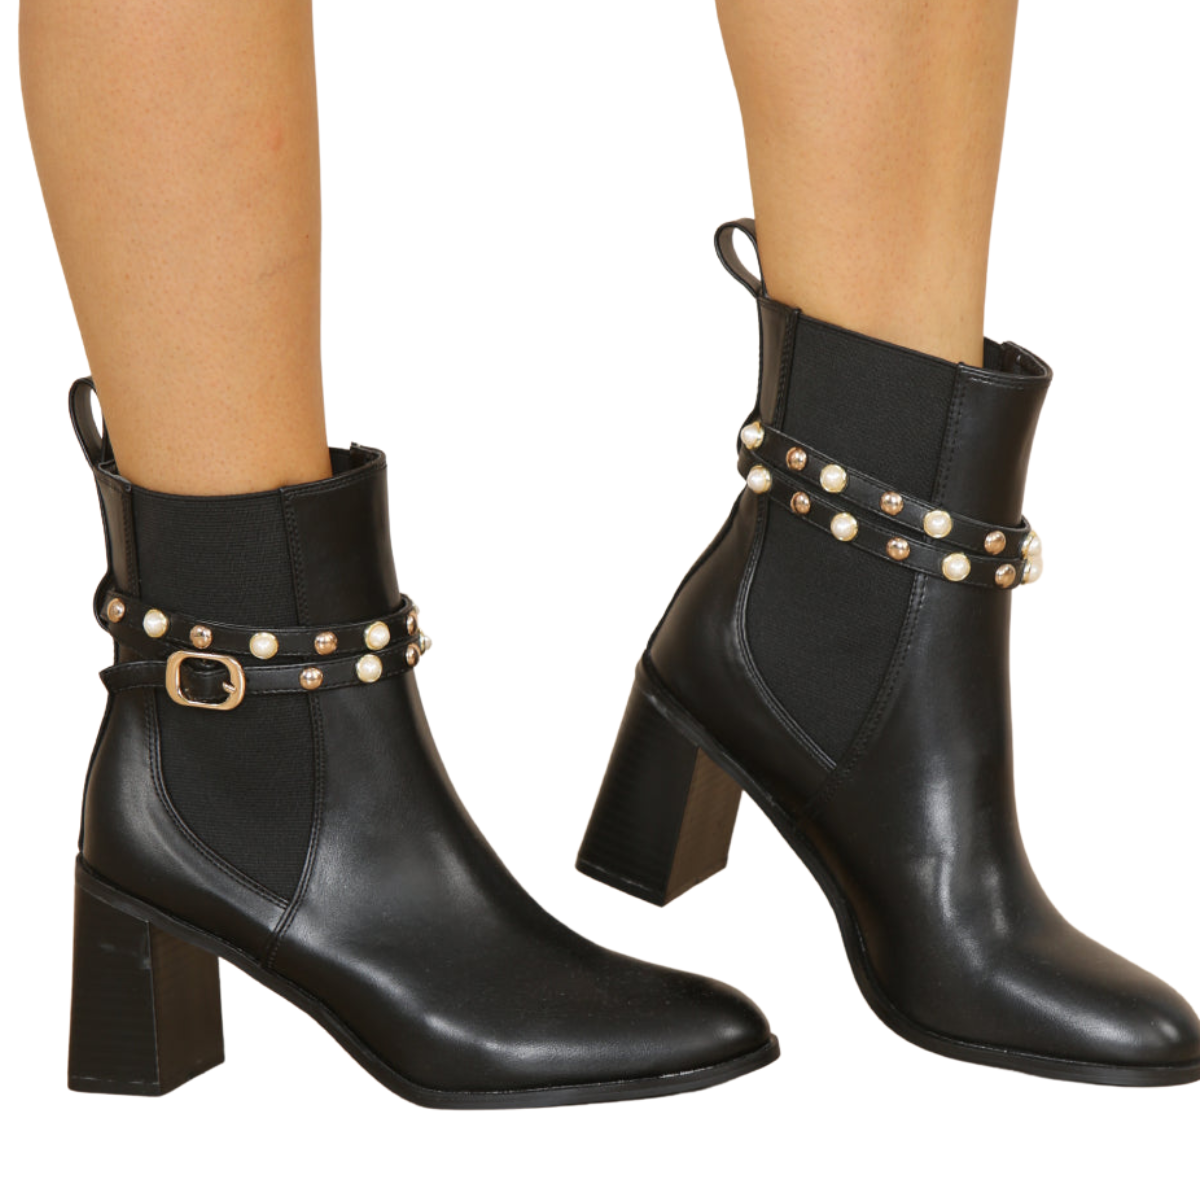 HOVIE ANKLE HIGH CHELSEA BLACK BOOTS WITH BLOCK HEEL